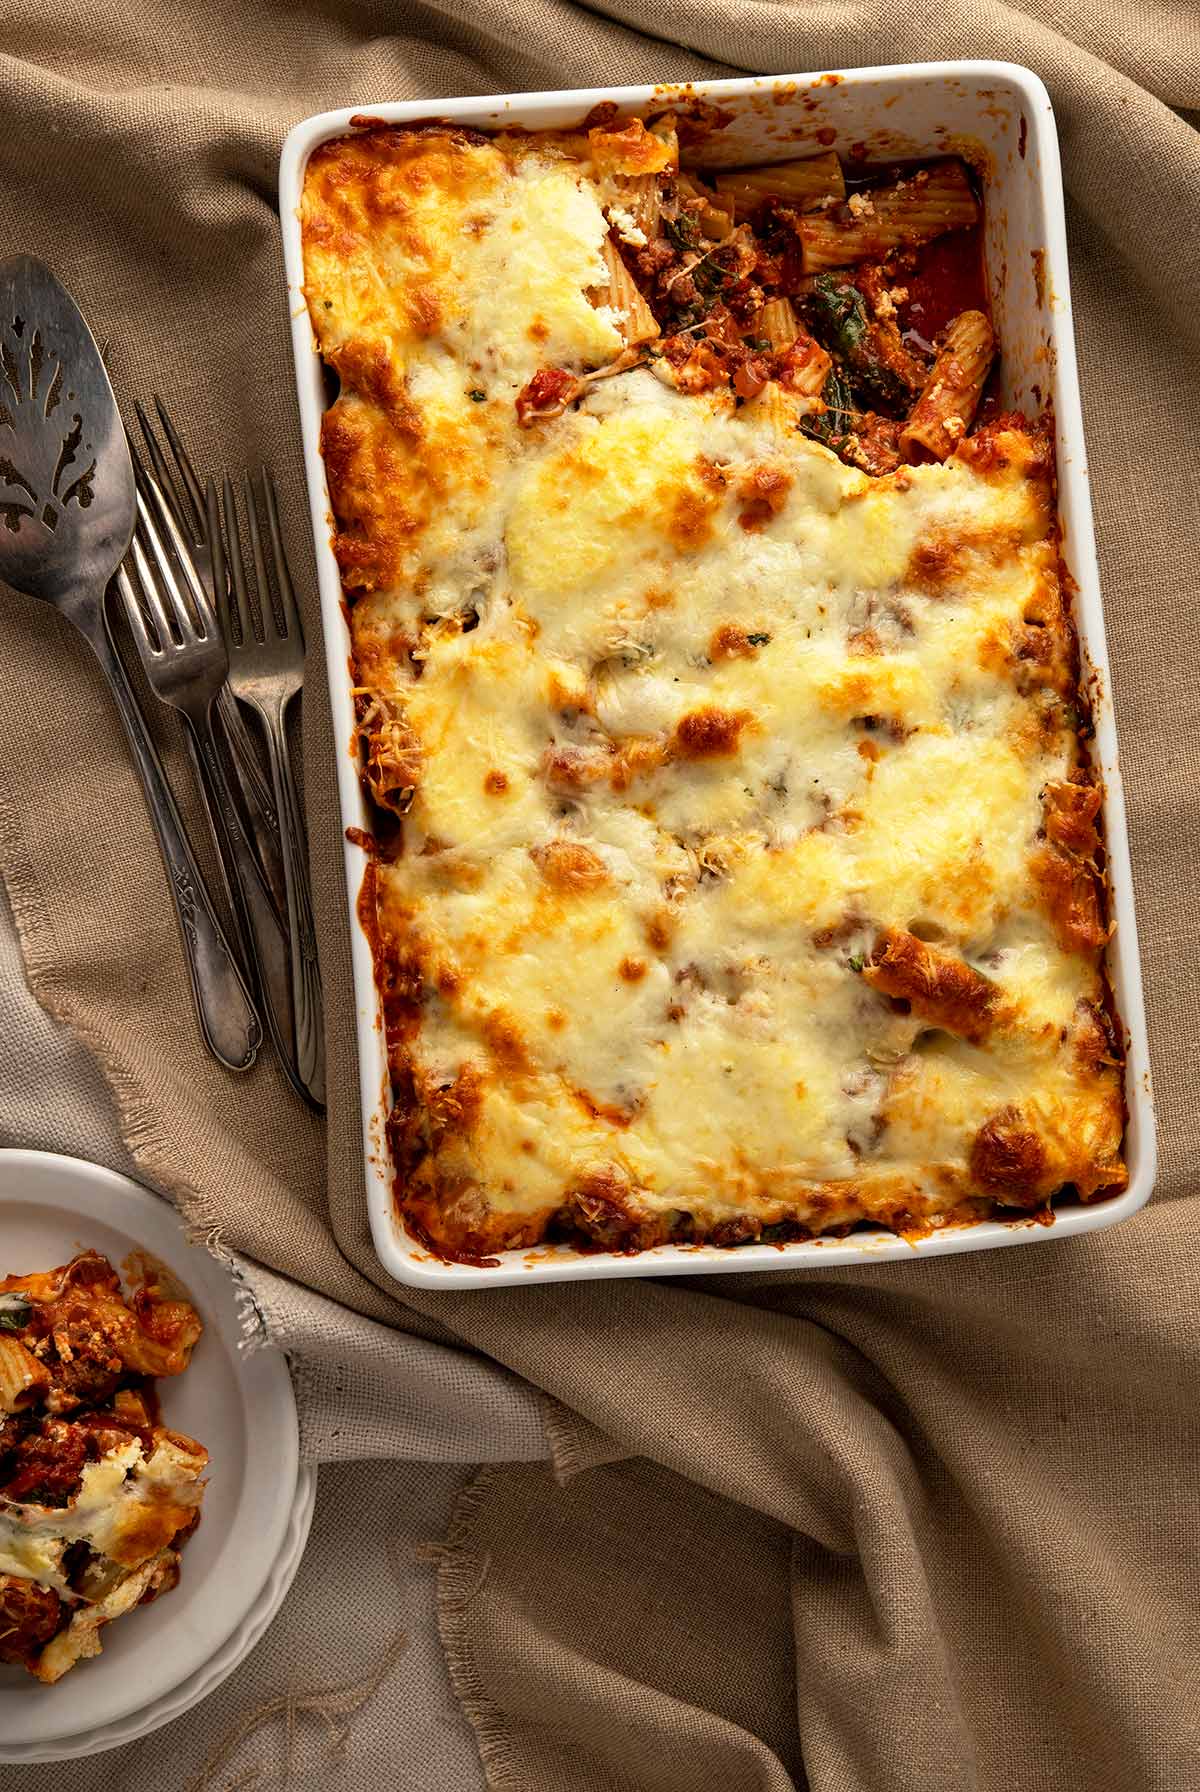 A venison casserole in the style of baked ziti, on a table with a portion dished out. 